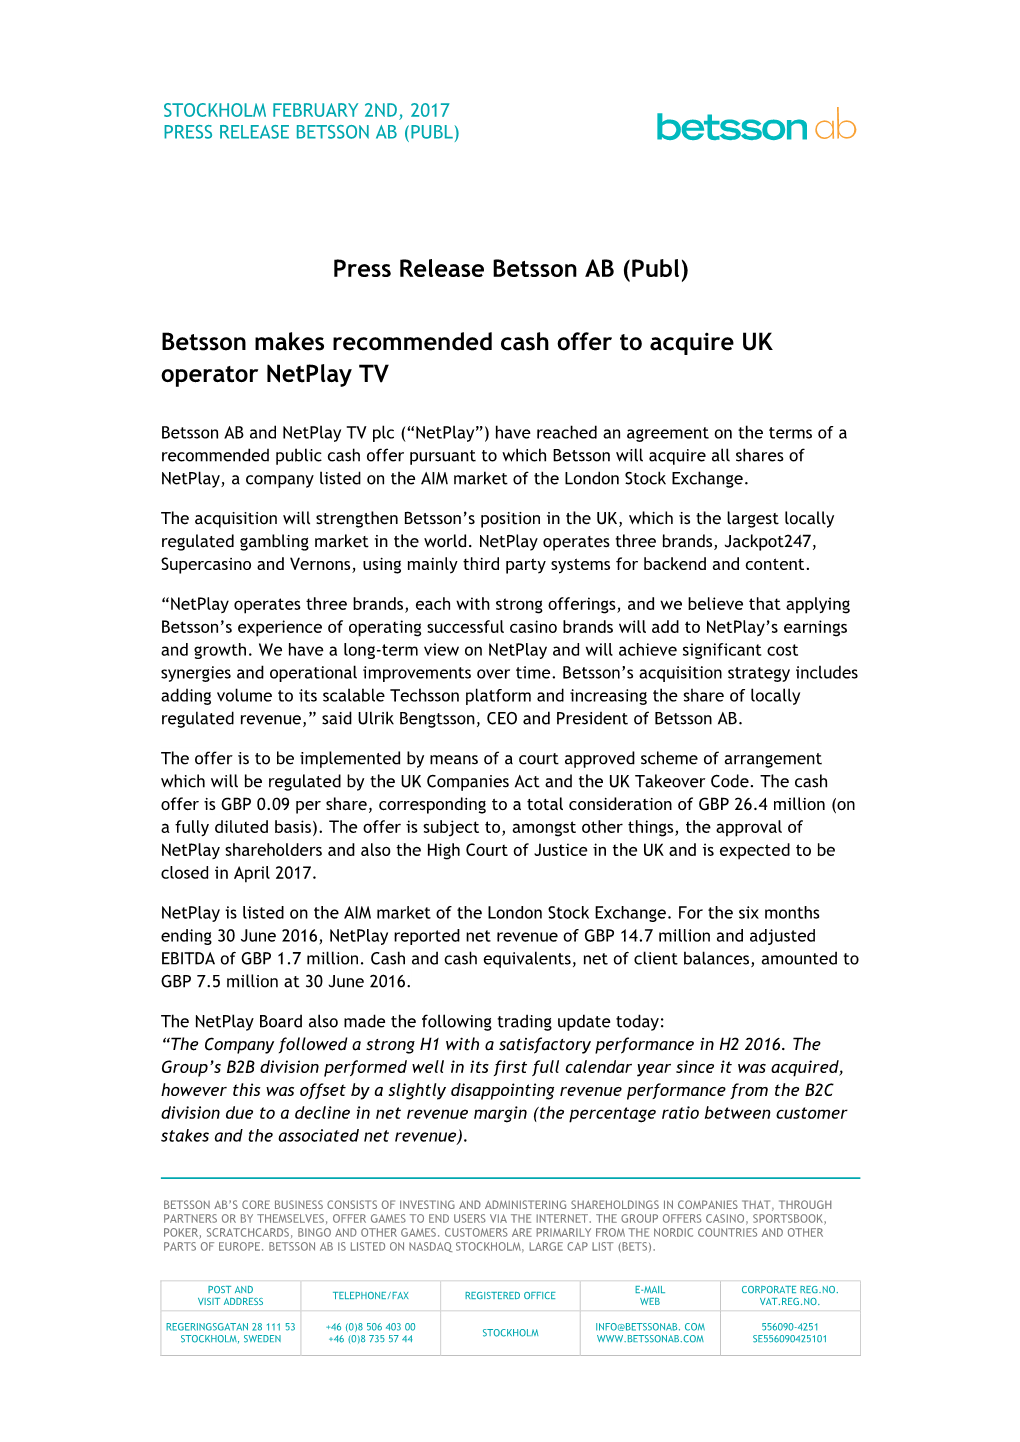 Press Release Betsson AB (Publ) Betsson Makes Recommended Cash Offer to Acquire UK Operator Netplay TV